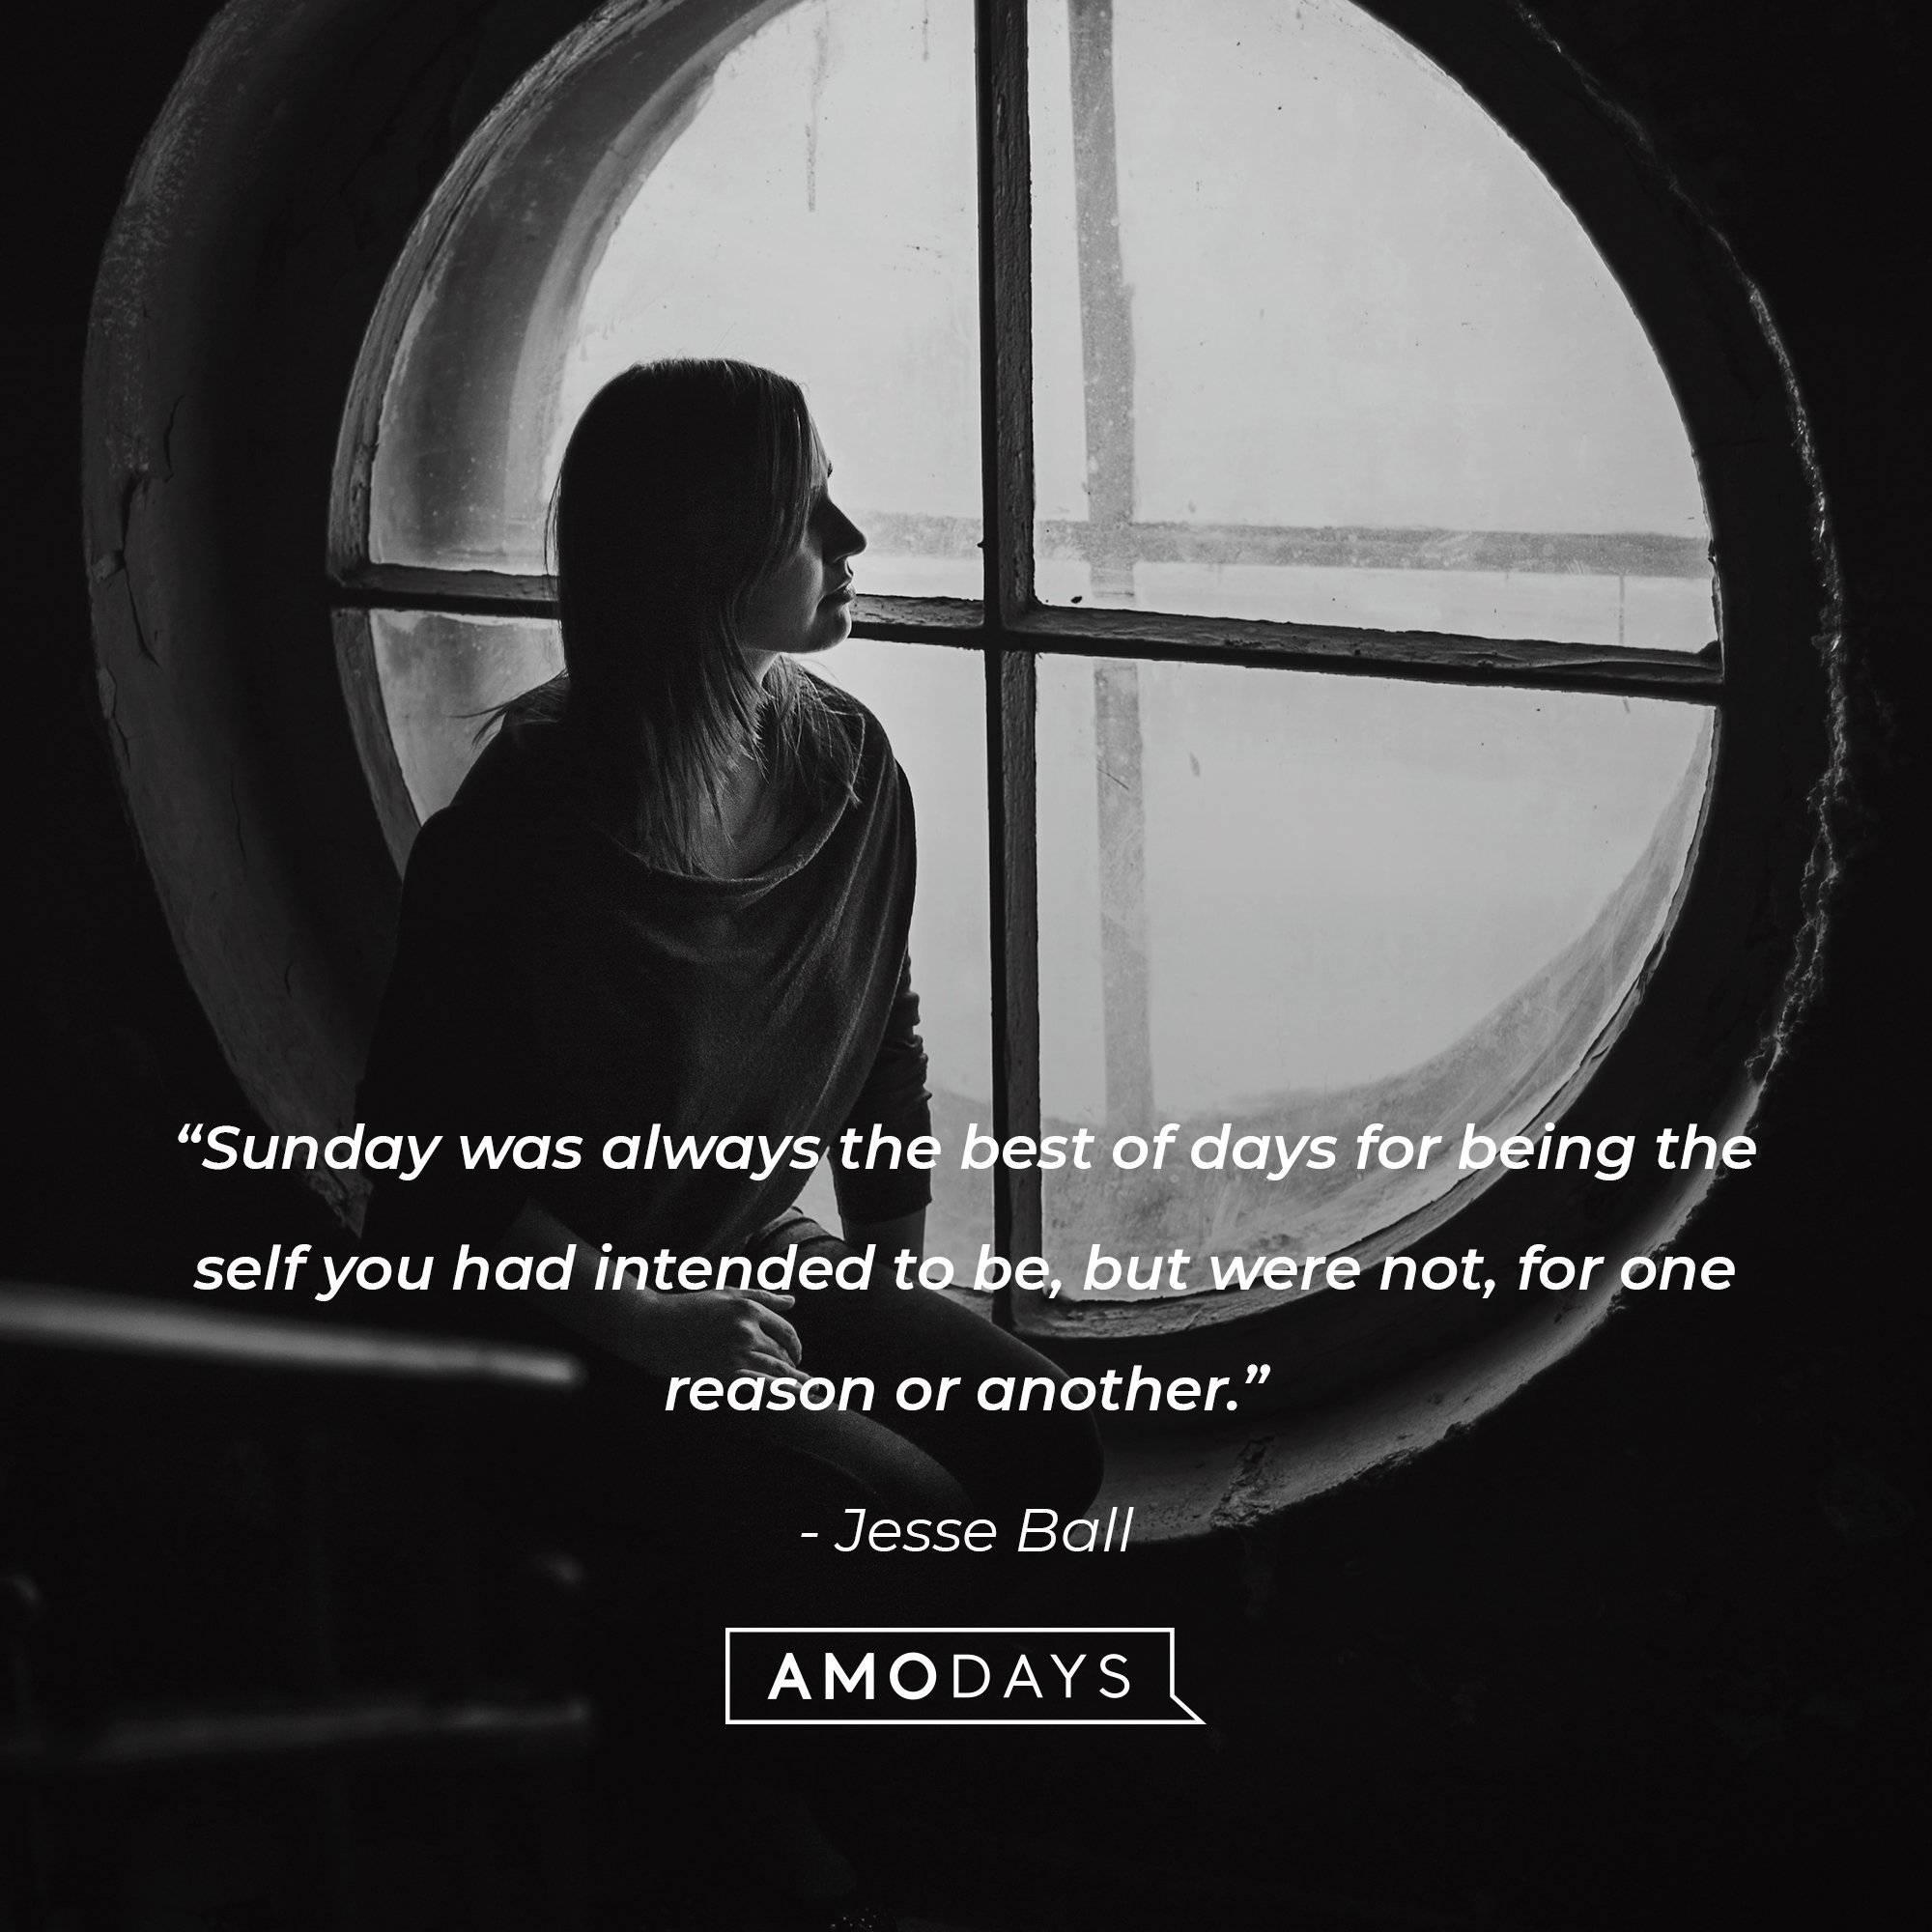 Jesse Ball's quote: “Sunday was always the best of days for being the self you had intended to be, but were not, for one reason or another.” | Image: AmoDays